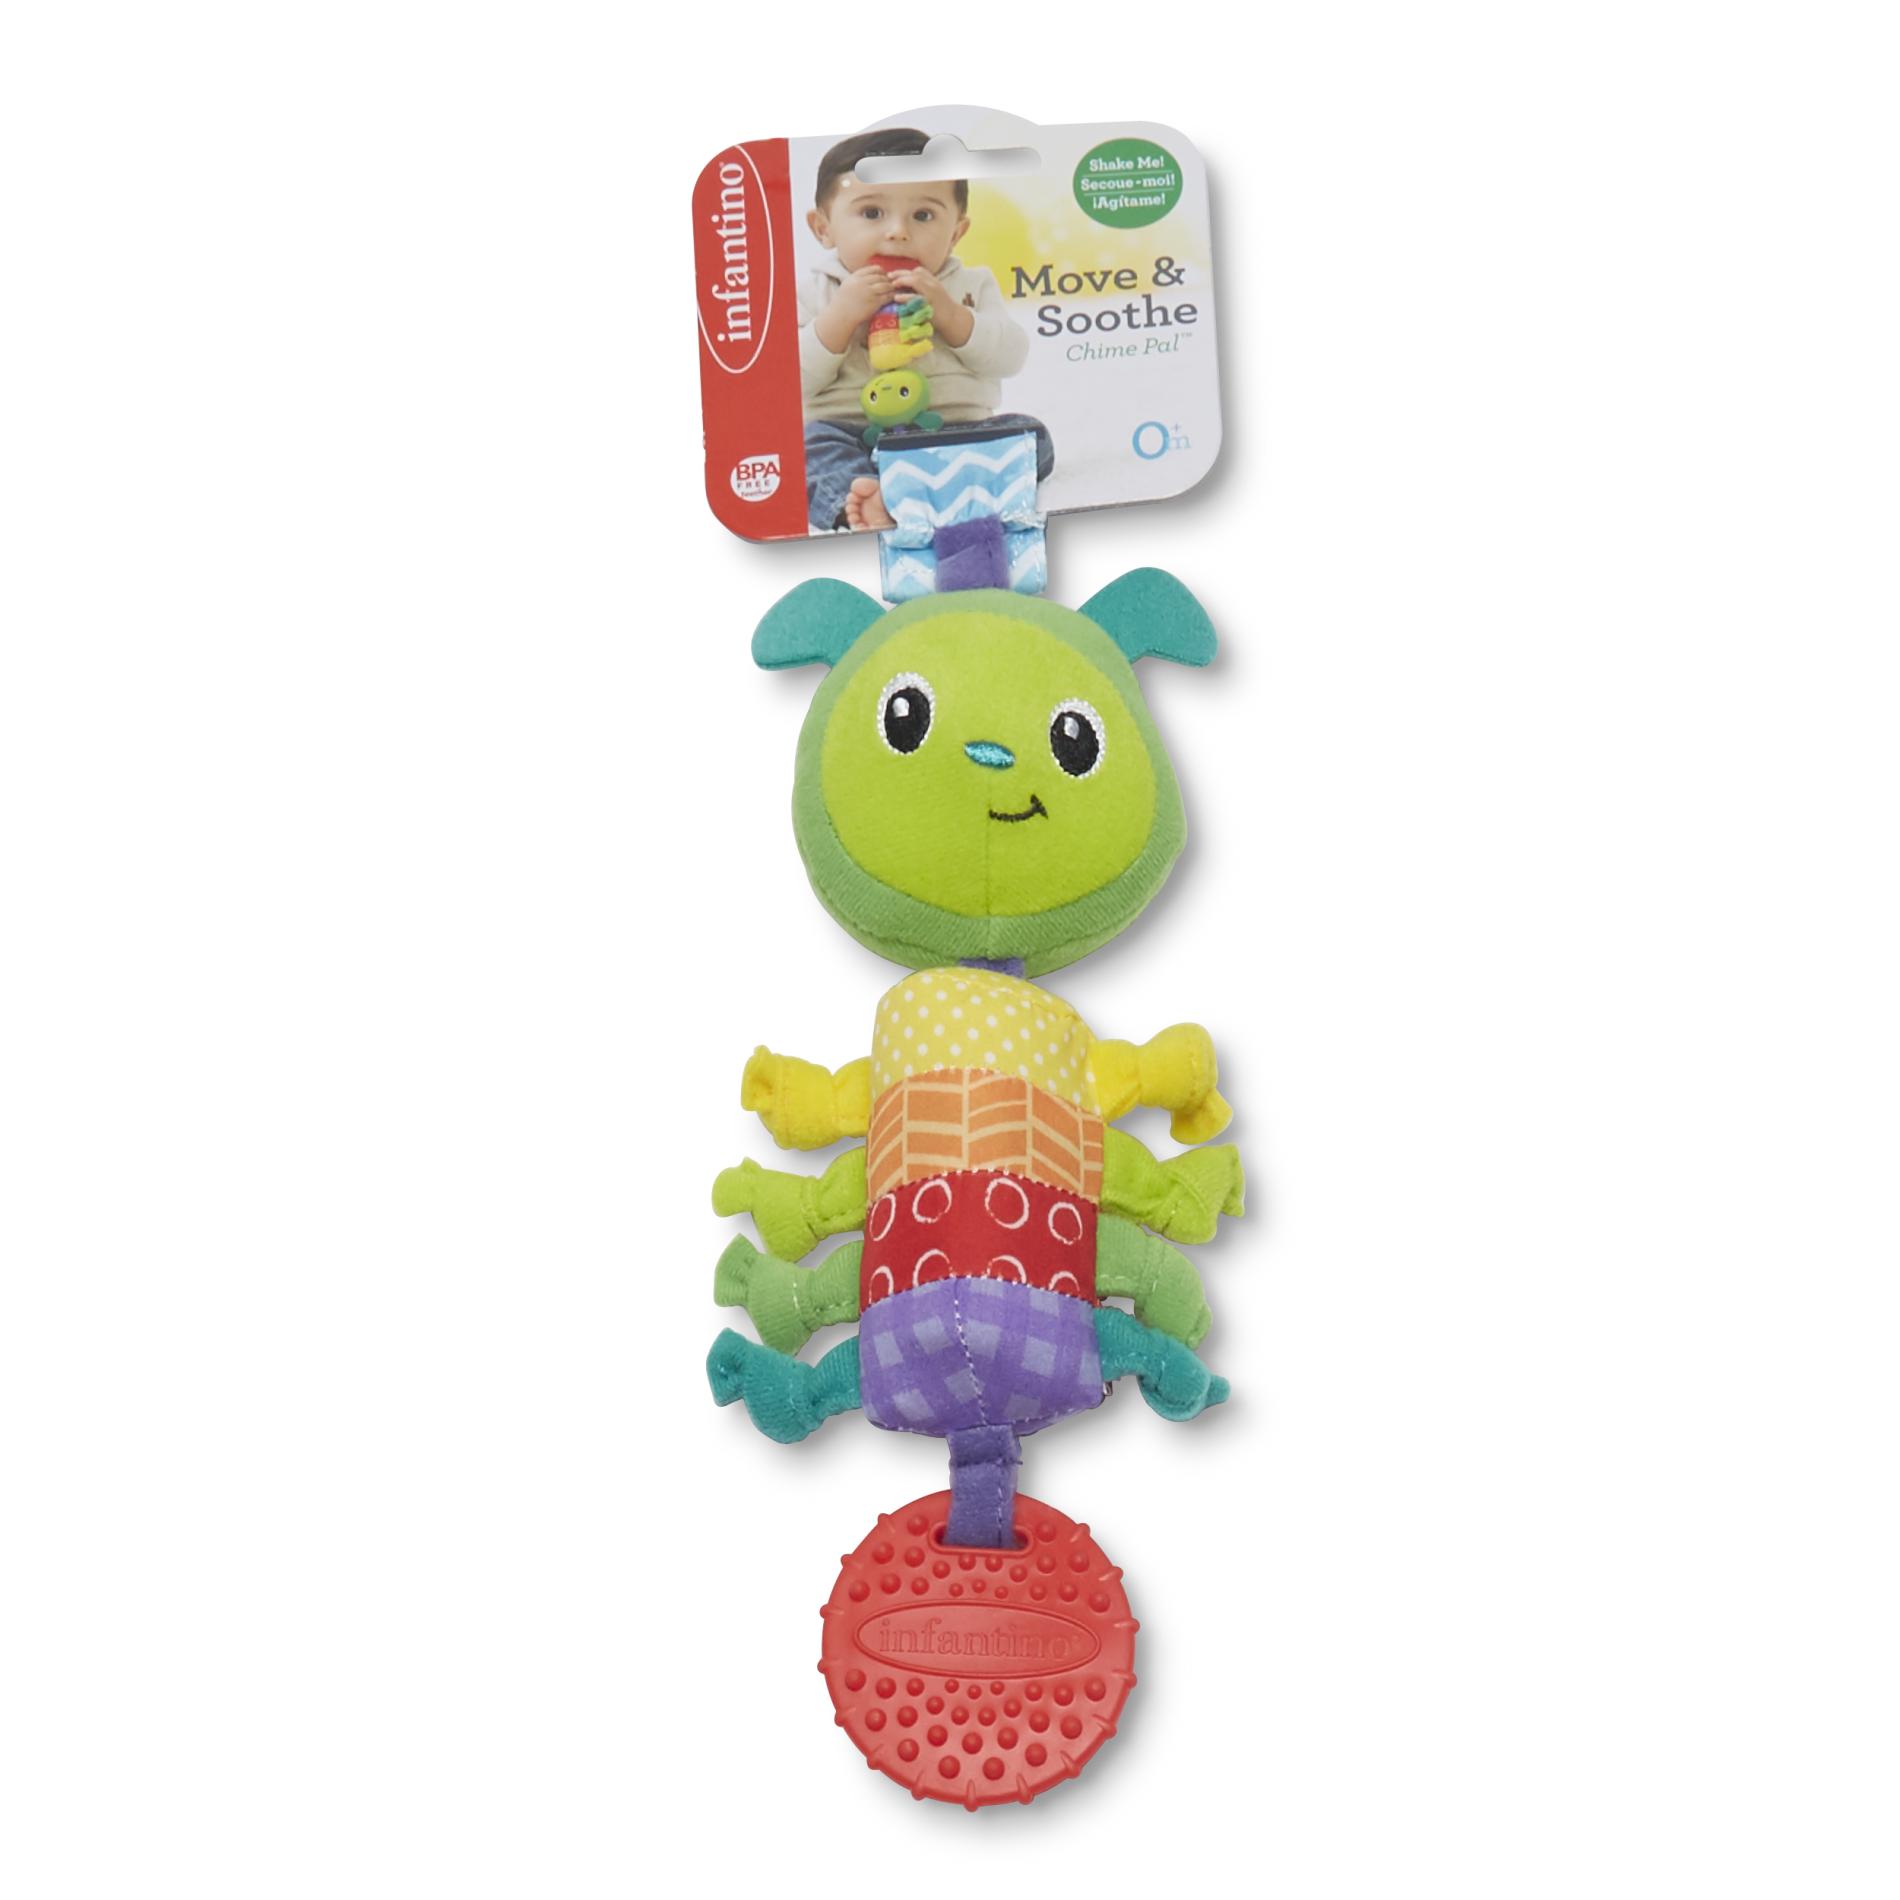 Infantino Infants' Move & Soothe Chime Pal - Caterpillar